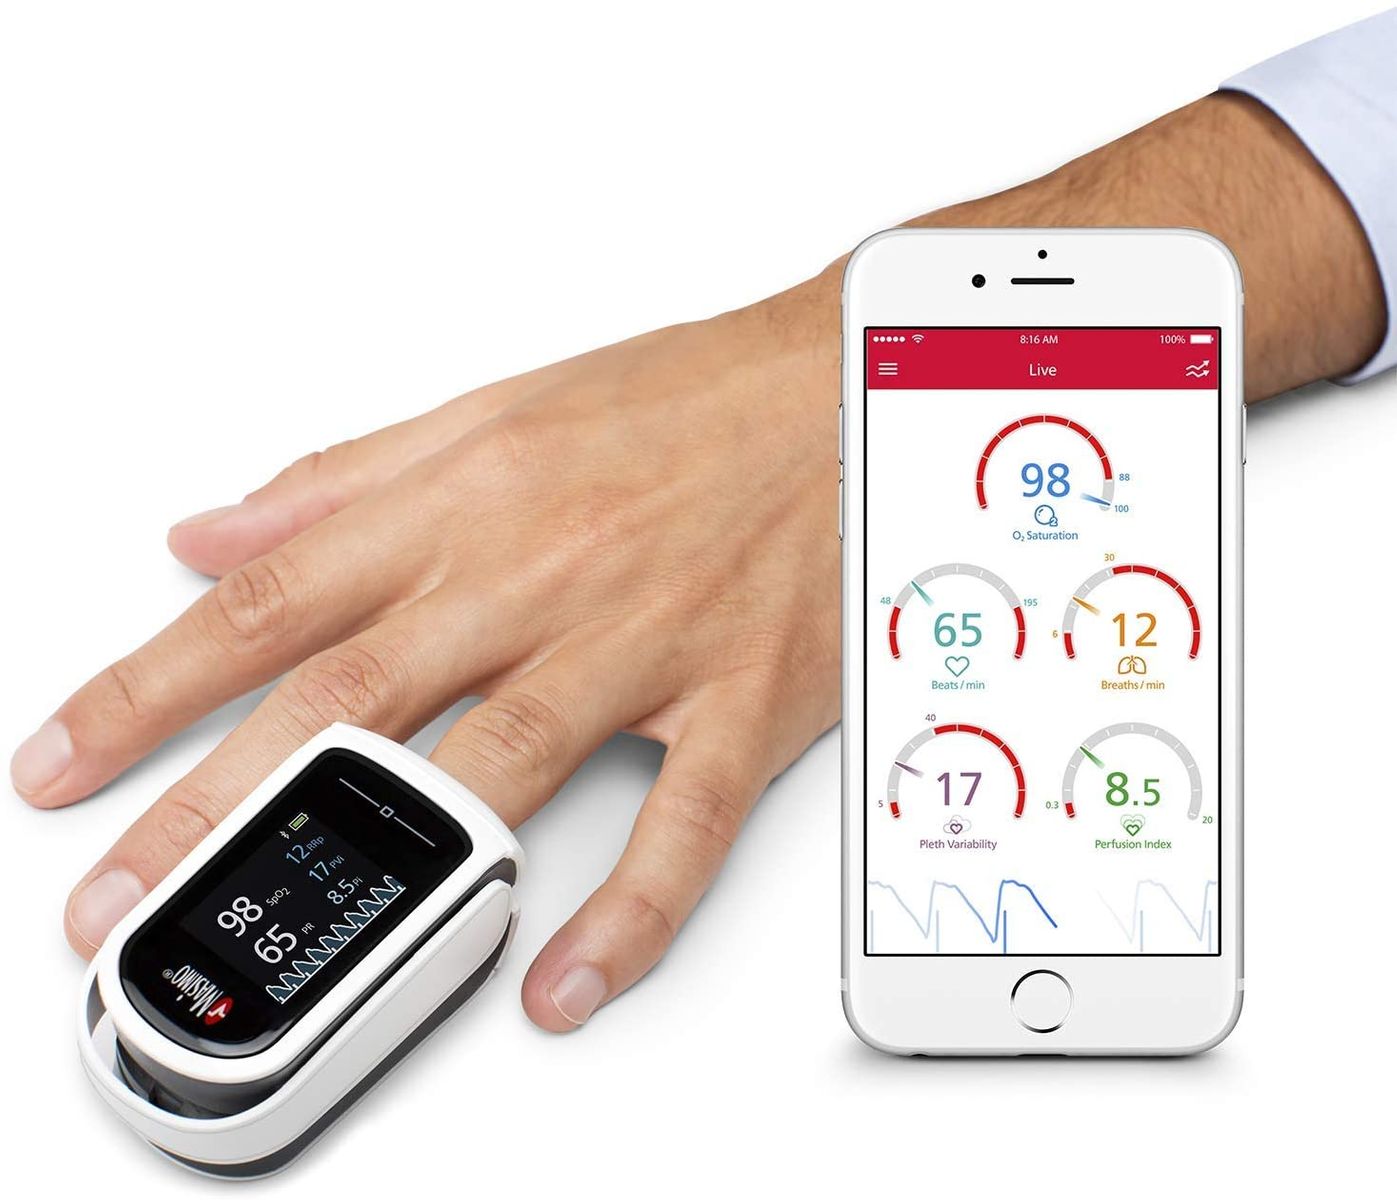 Masimo MightySat - Digital Finger Saturimeter | Measures and Records Physiological Values | Oxygen Saturation | Heart Rate and Respiration | Bluetooth | Compatible iOS and Android | White